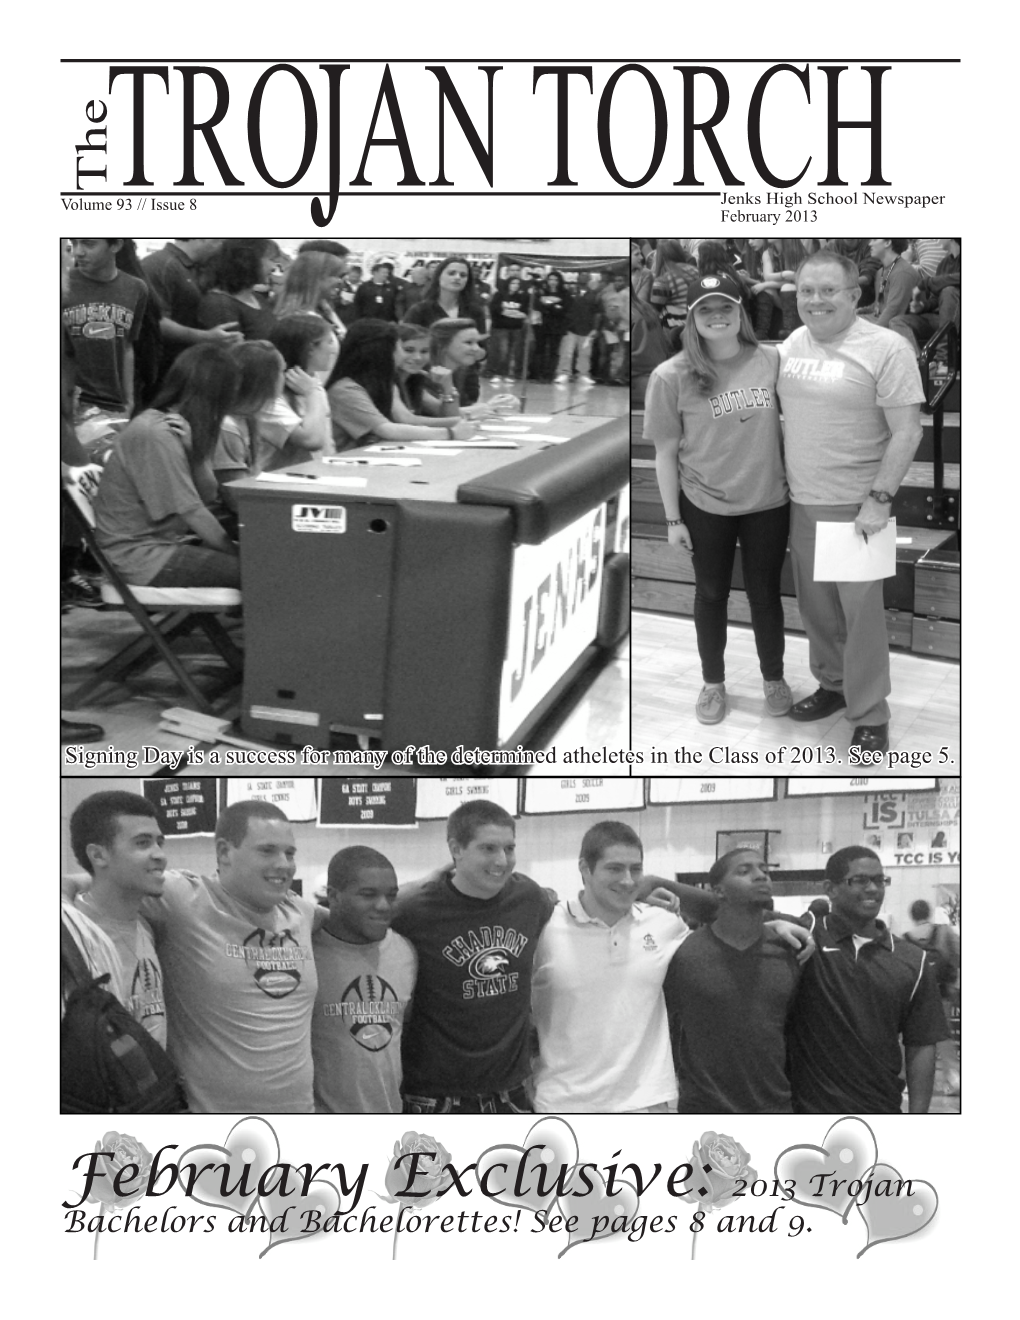 February Exclusive: 2013 Trojan Bachelors and Bachelorettes! See Pages 8 and 9